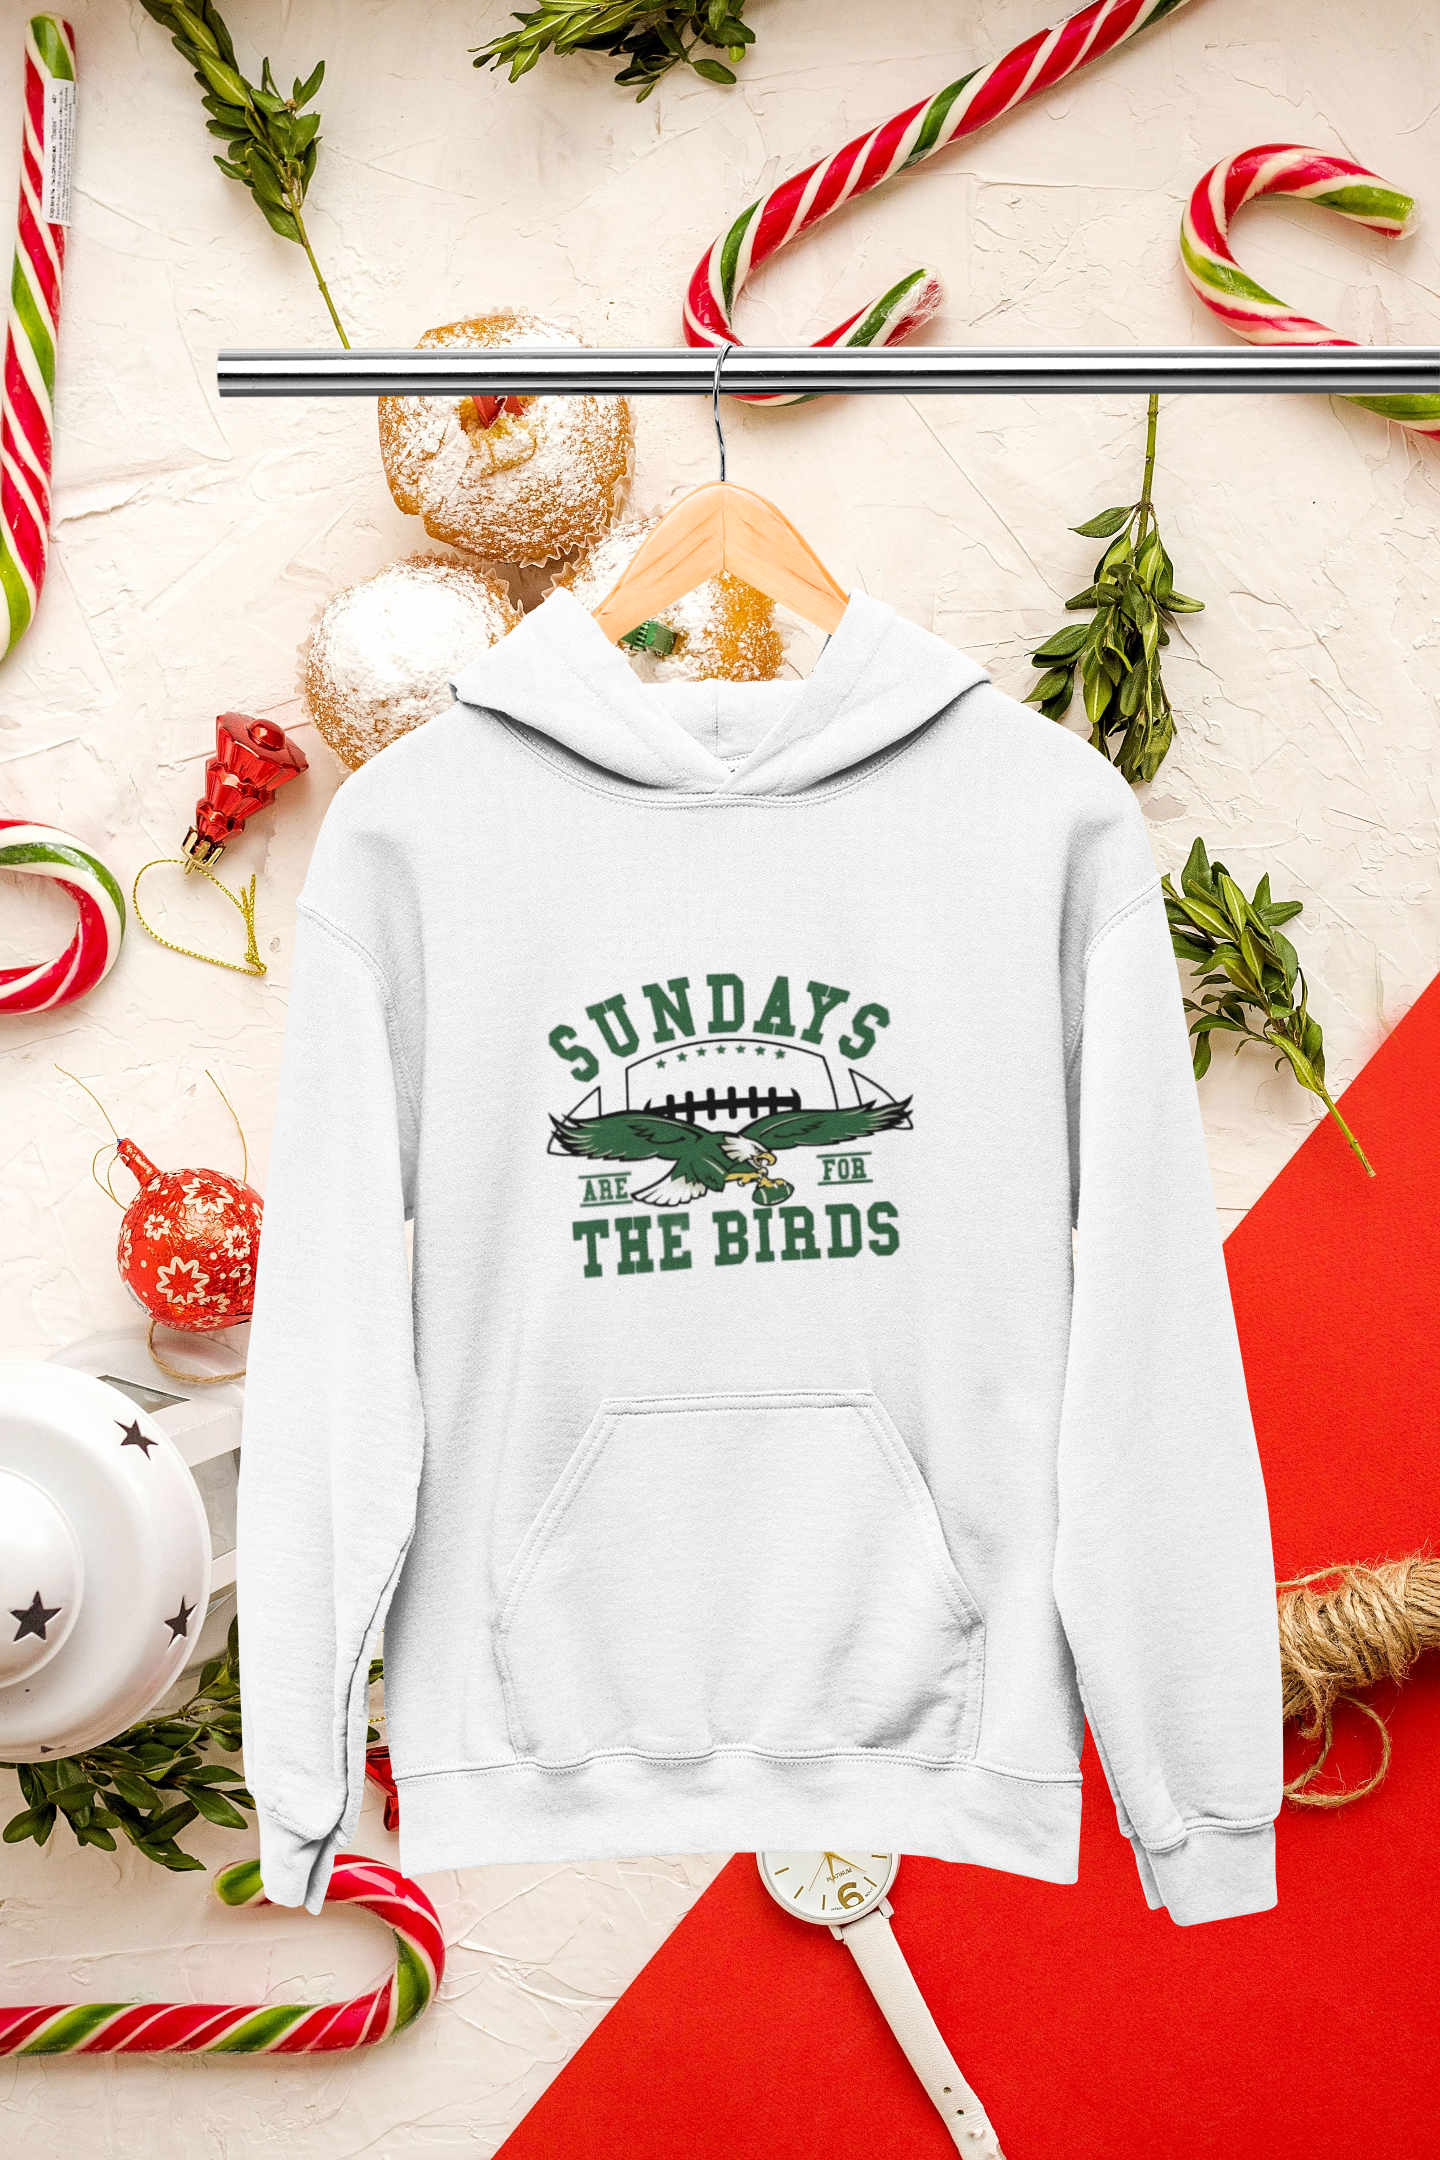 Eagles Sundays are for the bids Hoodie